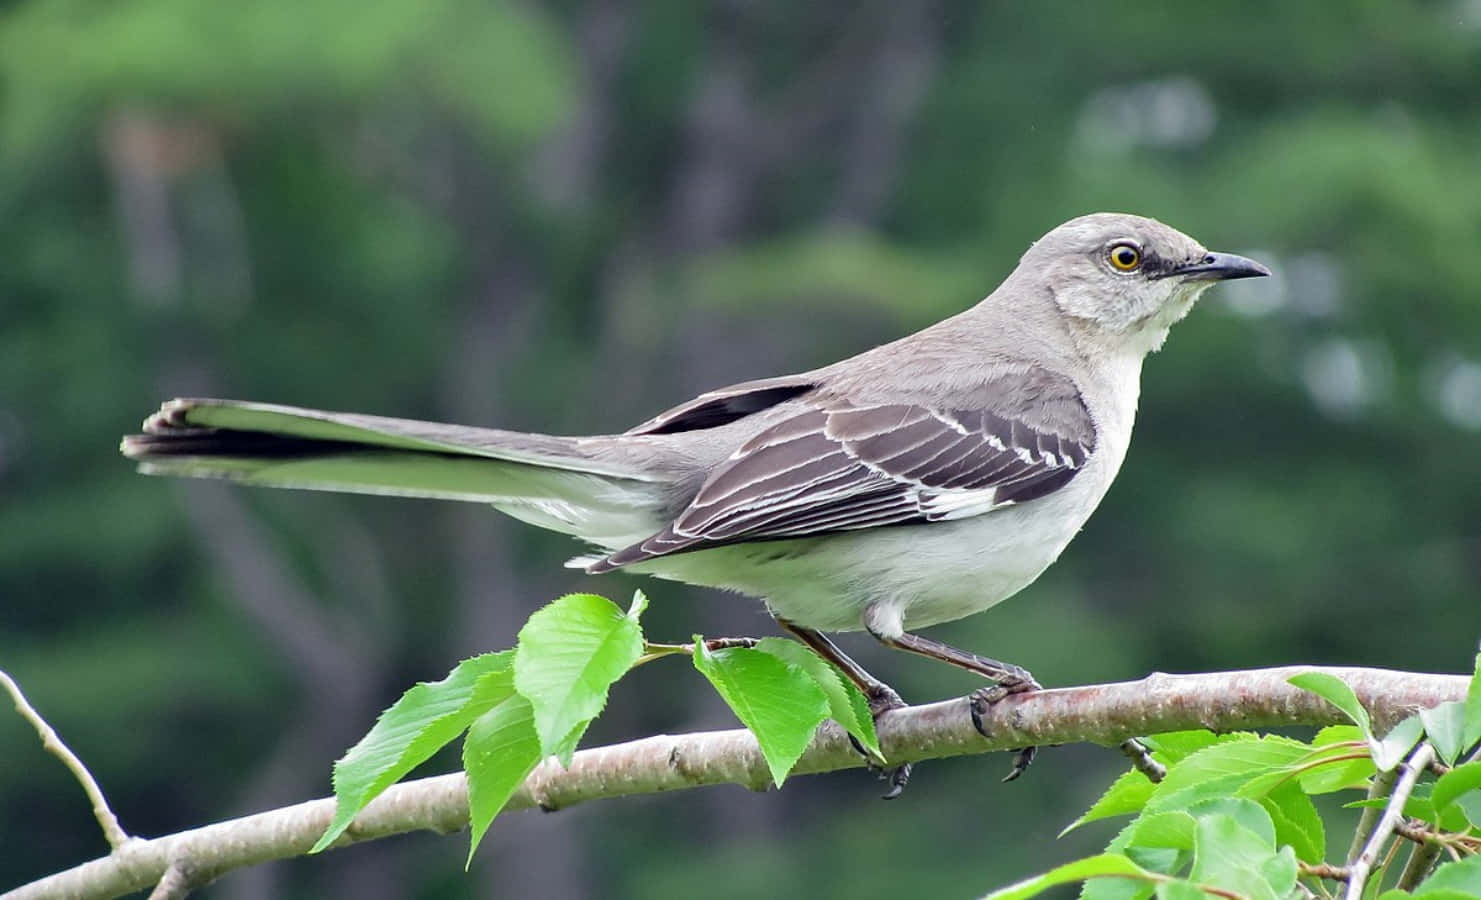 Listen to the beautiful melodious song of the mockingbird